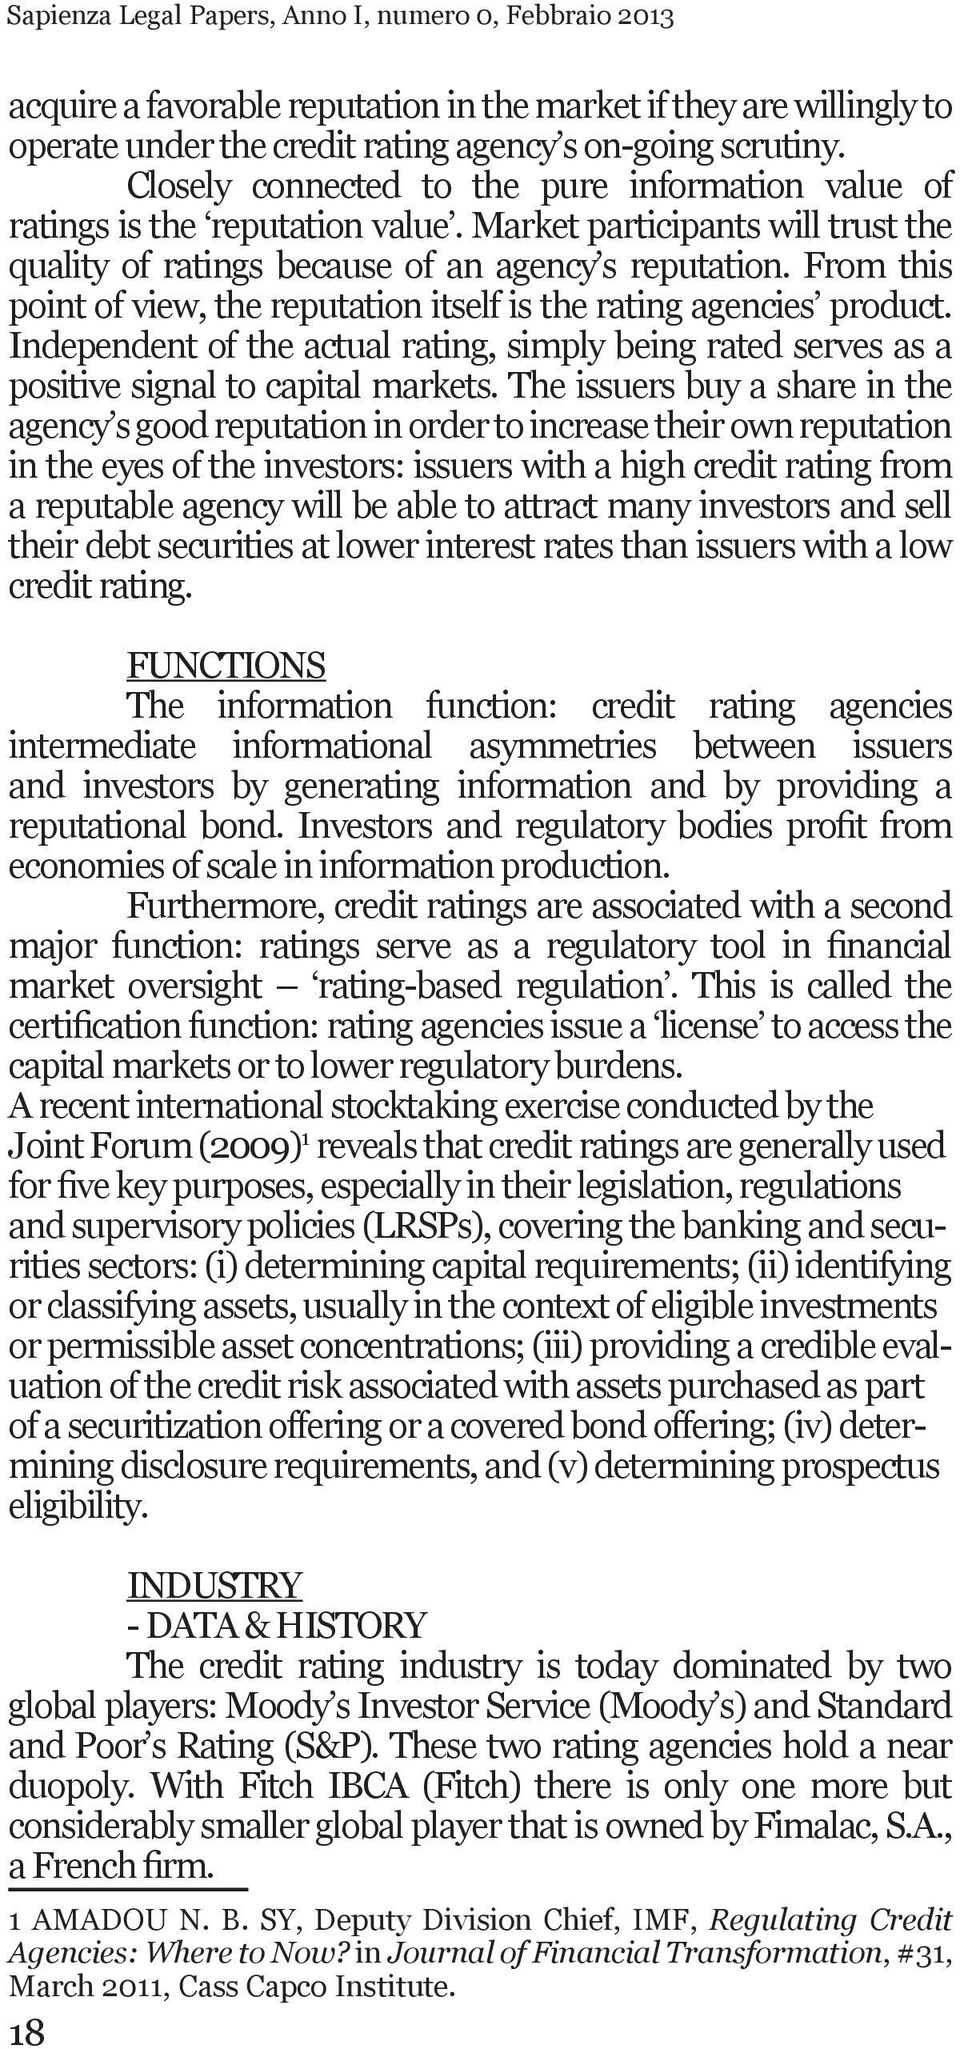 From this point of view, the reputation itself is the rating agencies product. Independent of the actual rating, simply being rated serves as a positive signal to capital markets.